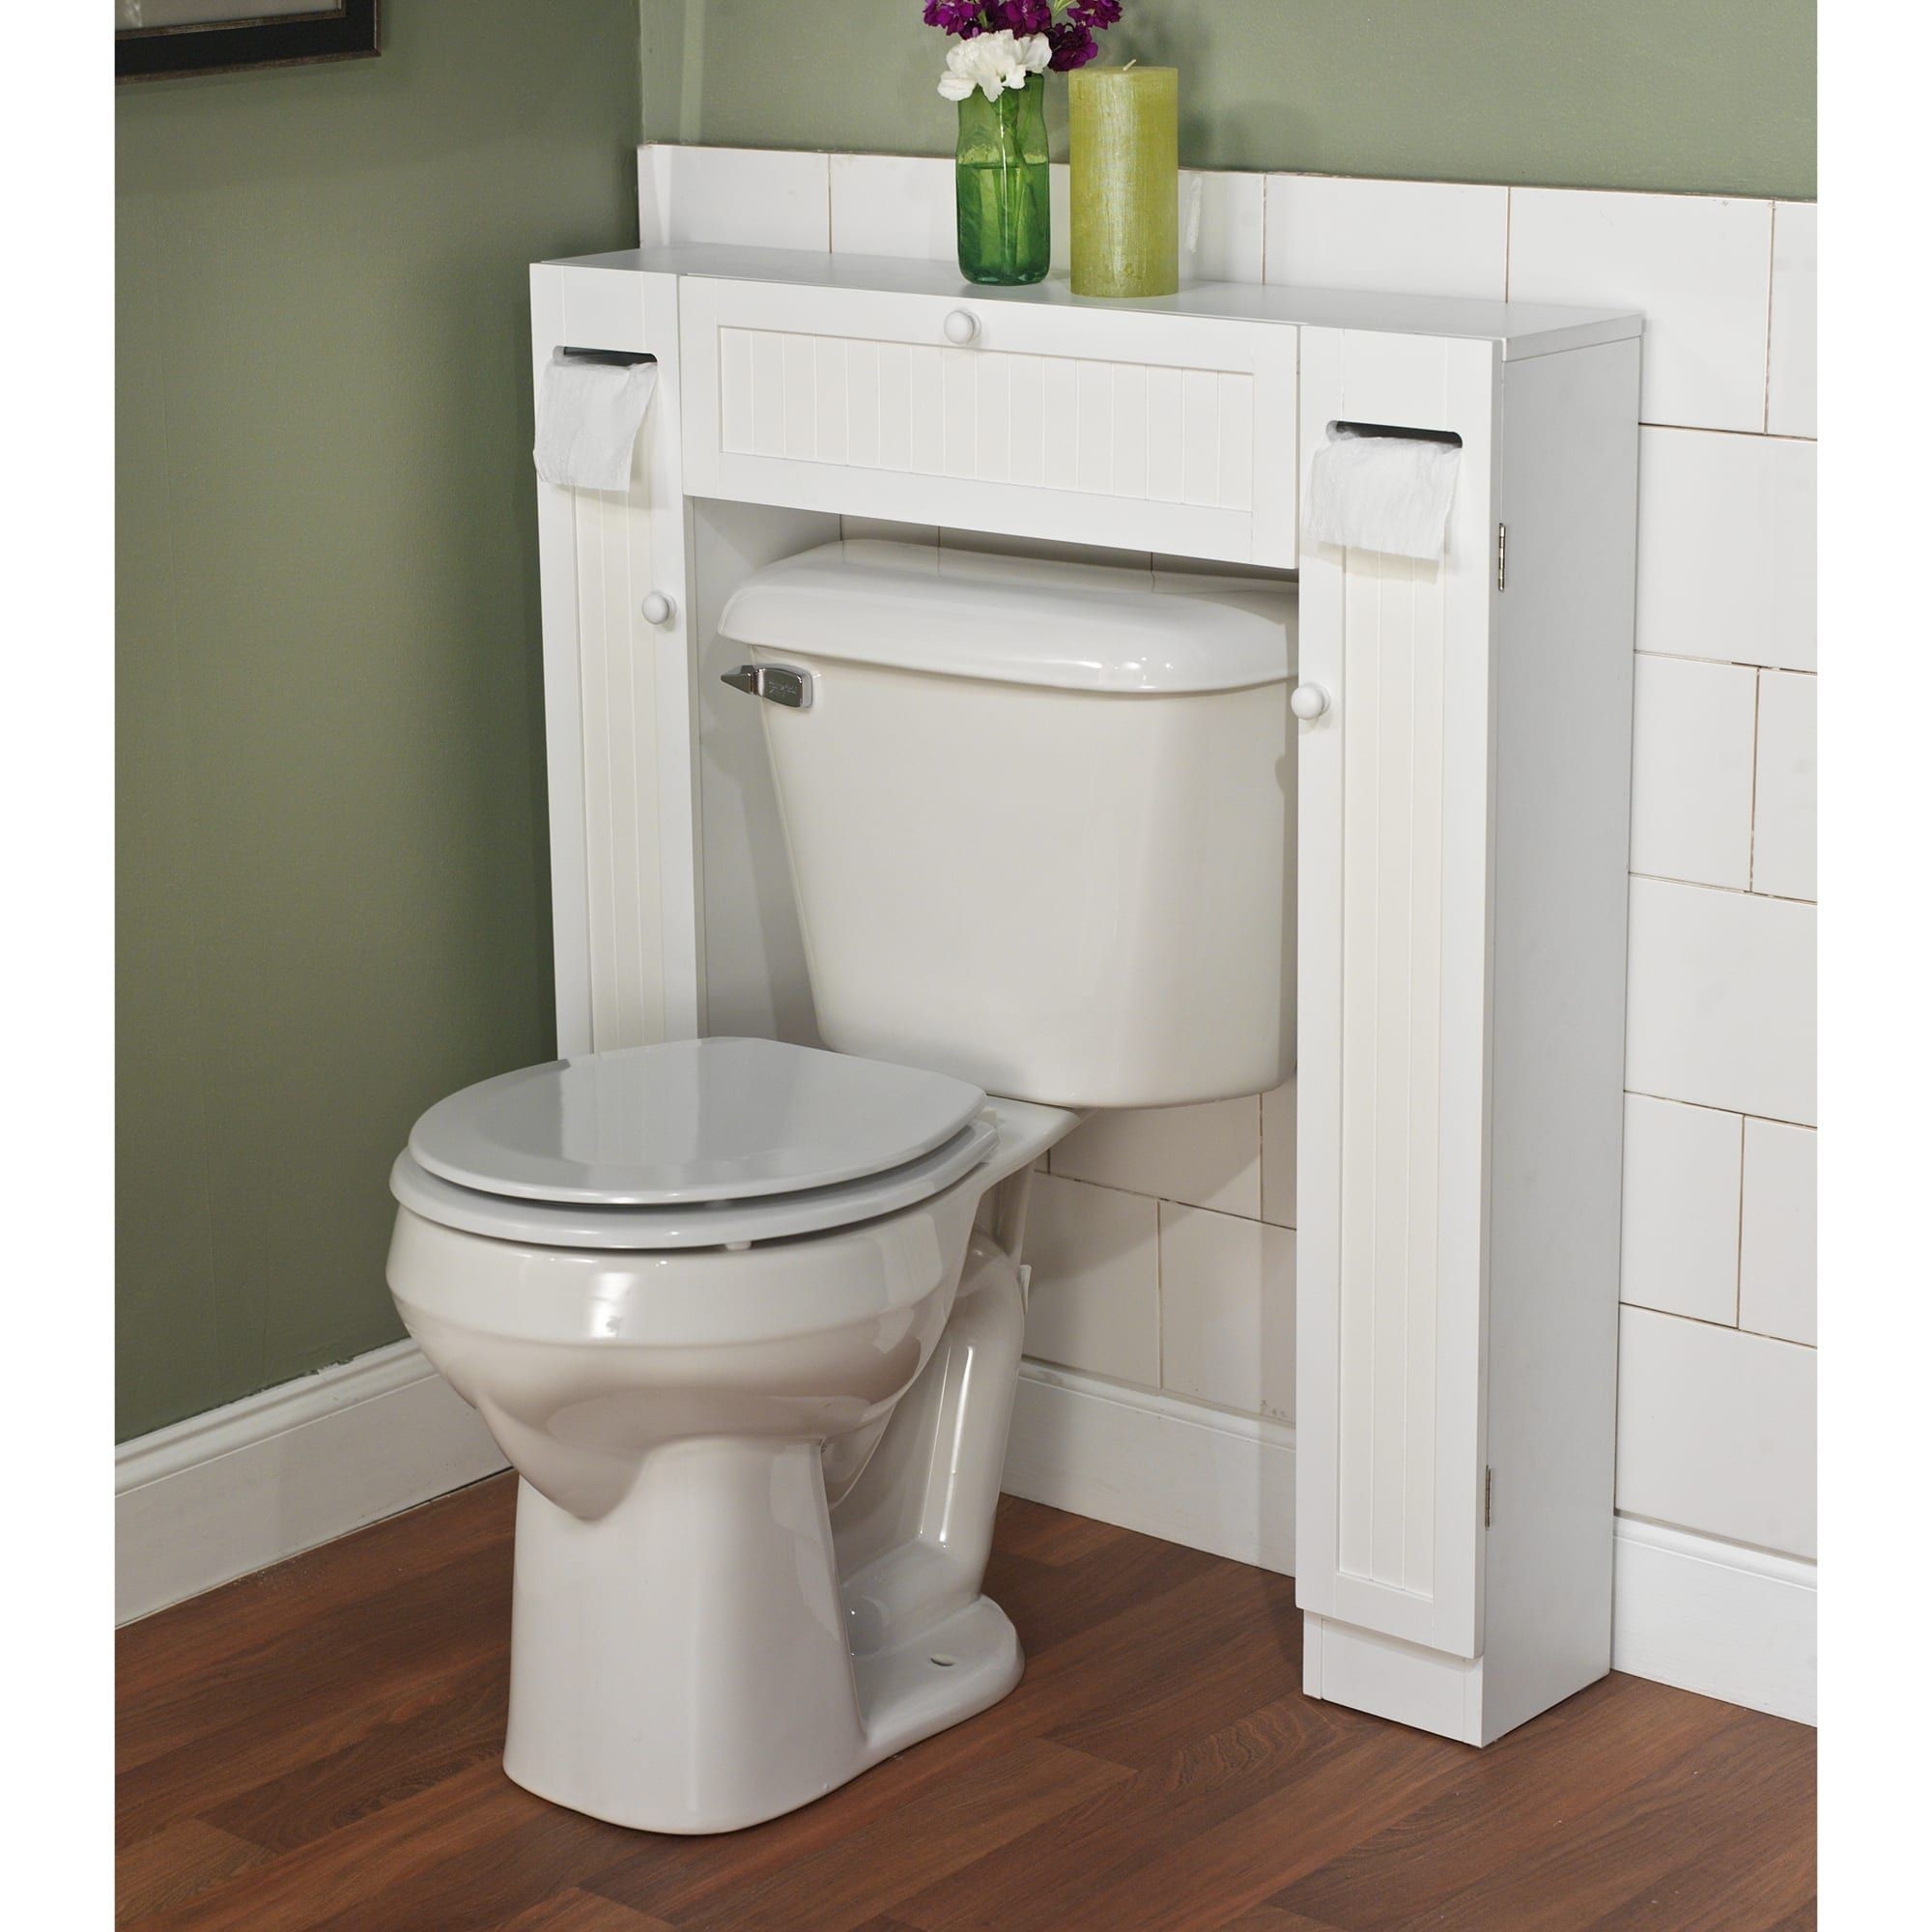 Large Over Toilet Cabinet